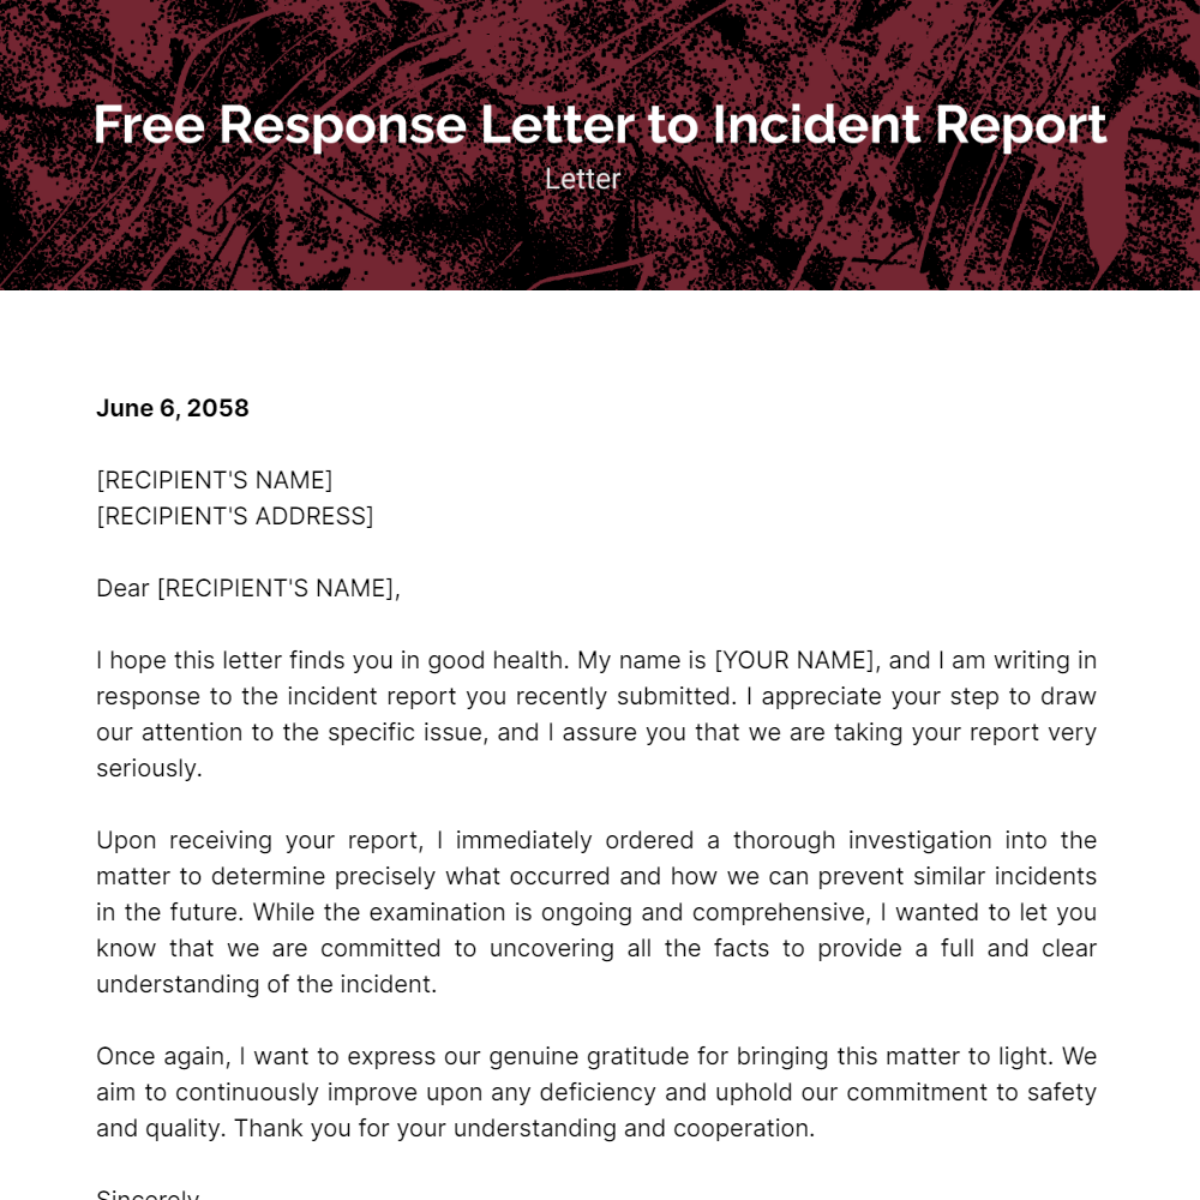 Free Response Letter to Incident Report